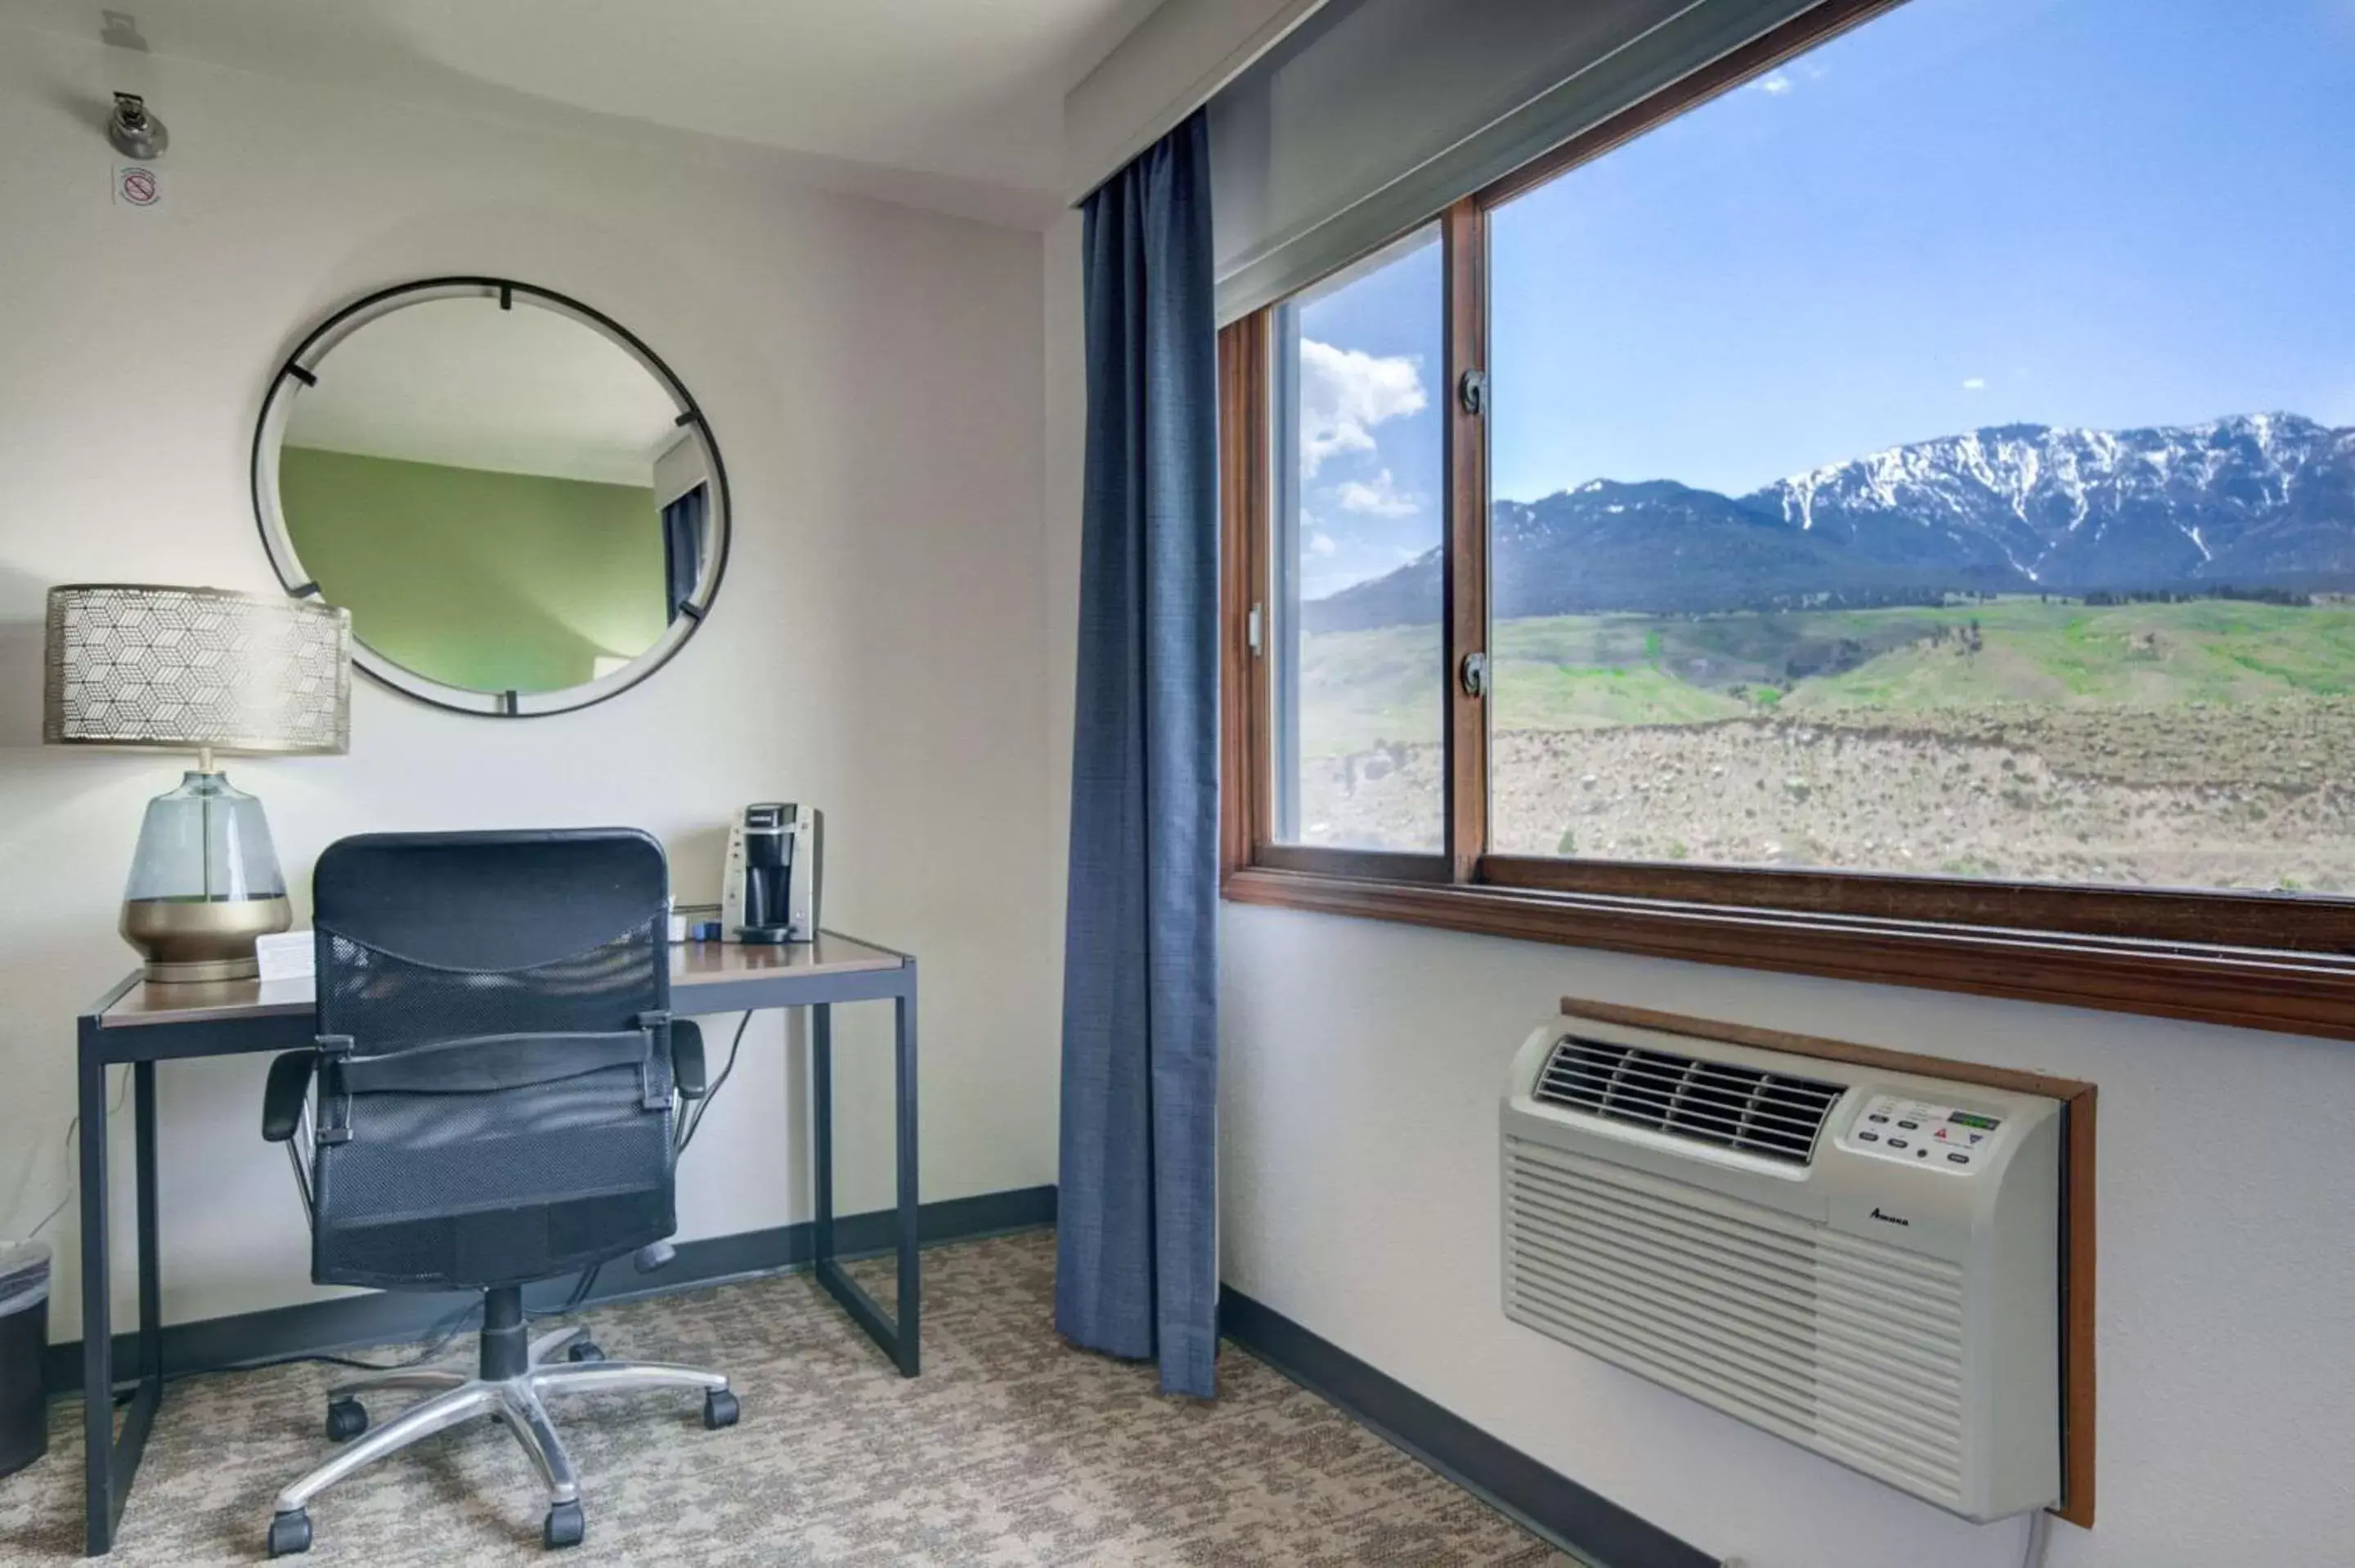 Bedroom in The Ridgeline Hotel at Yellowstone, Ascend Hotel Collection